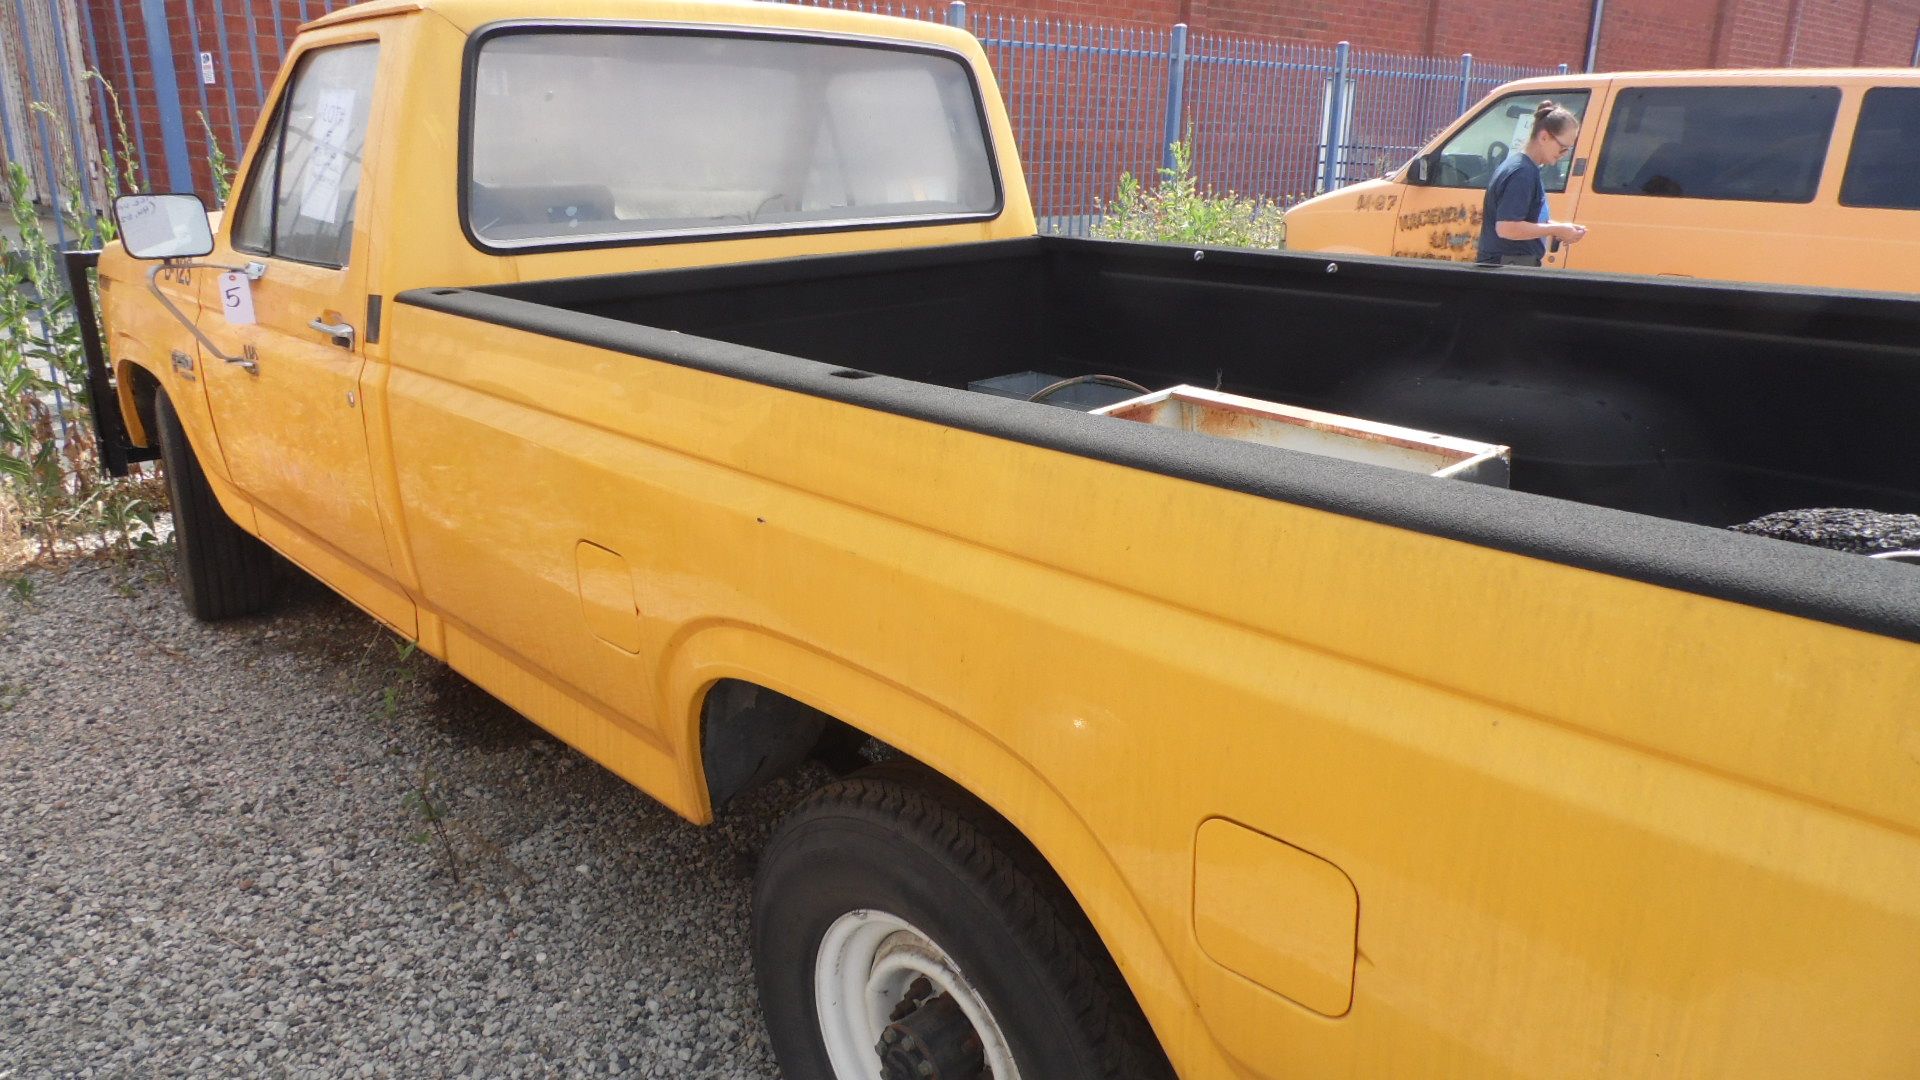 1985 FORD PICK-UP TRUCK (MILEAGE 44,620) (GALE LOCATION) **STARTS UP WITH KEY** - Image 2 of 3